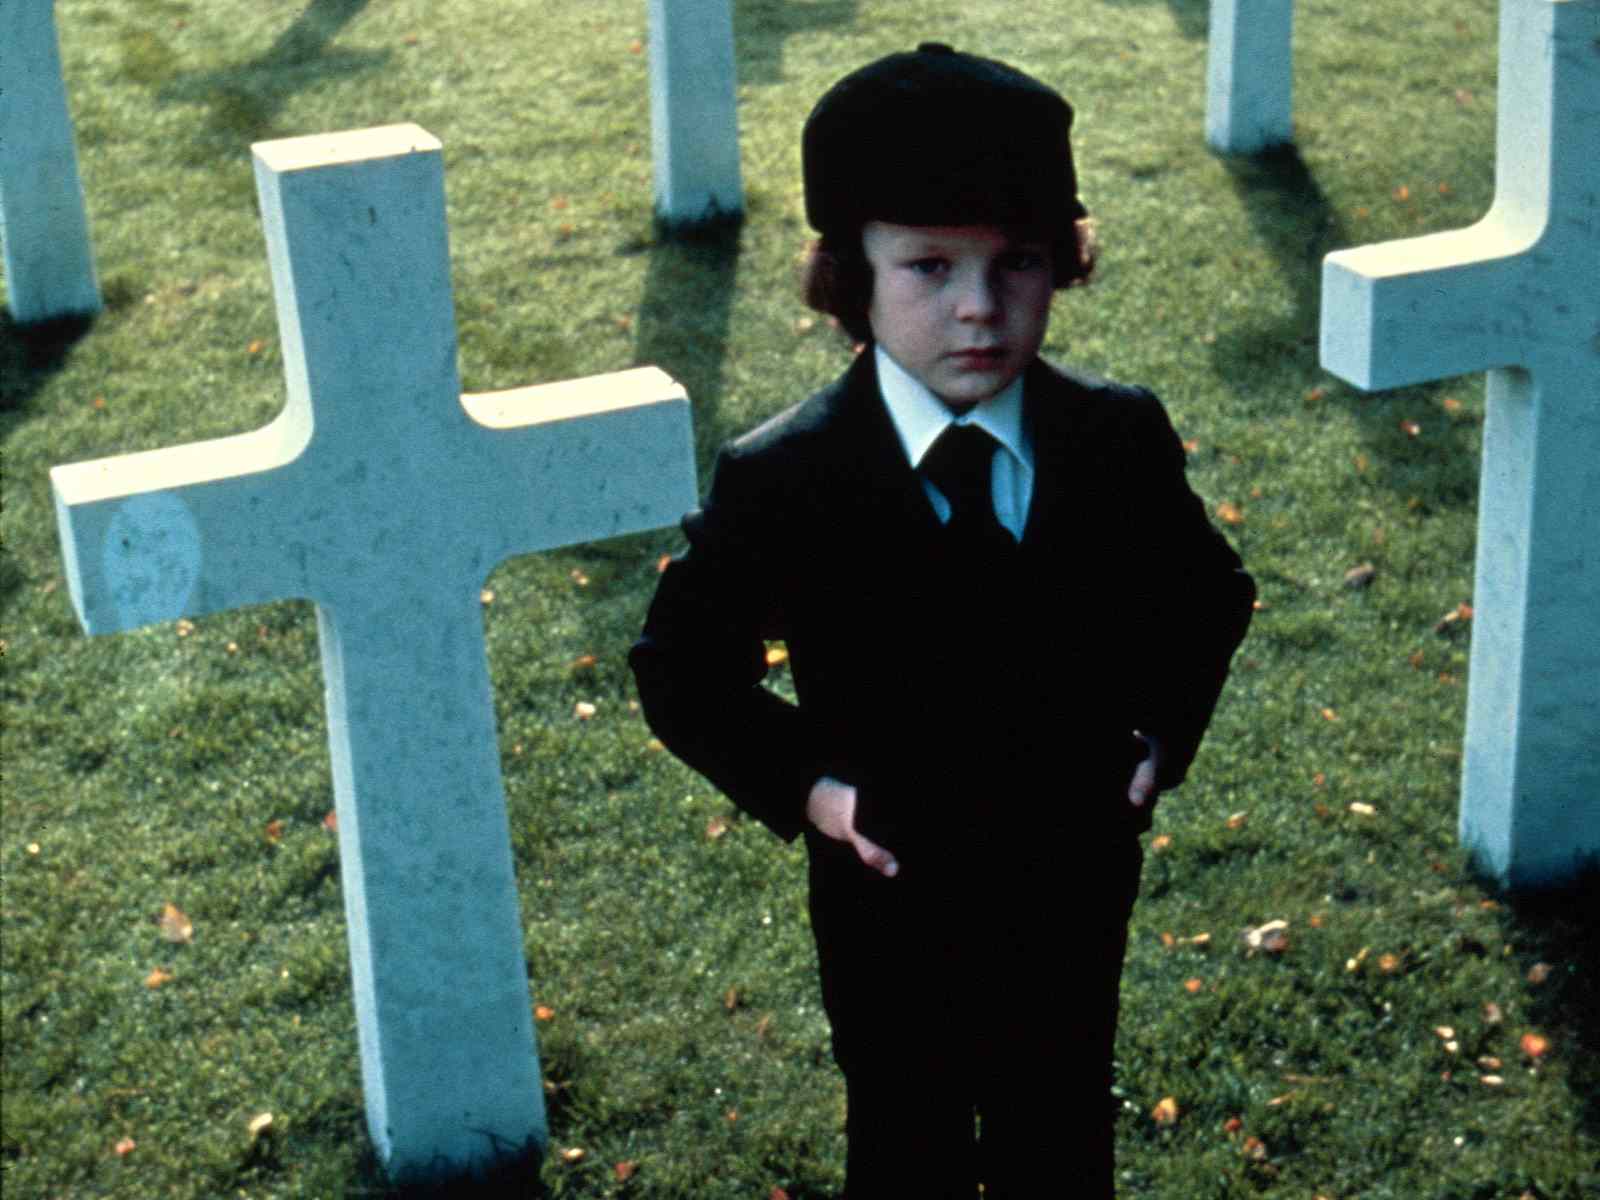 damien from the hit demonic movie The Omen from 1976 directed by richard donner